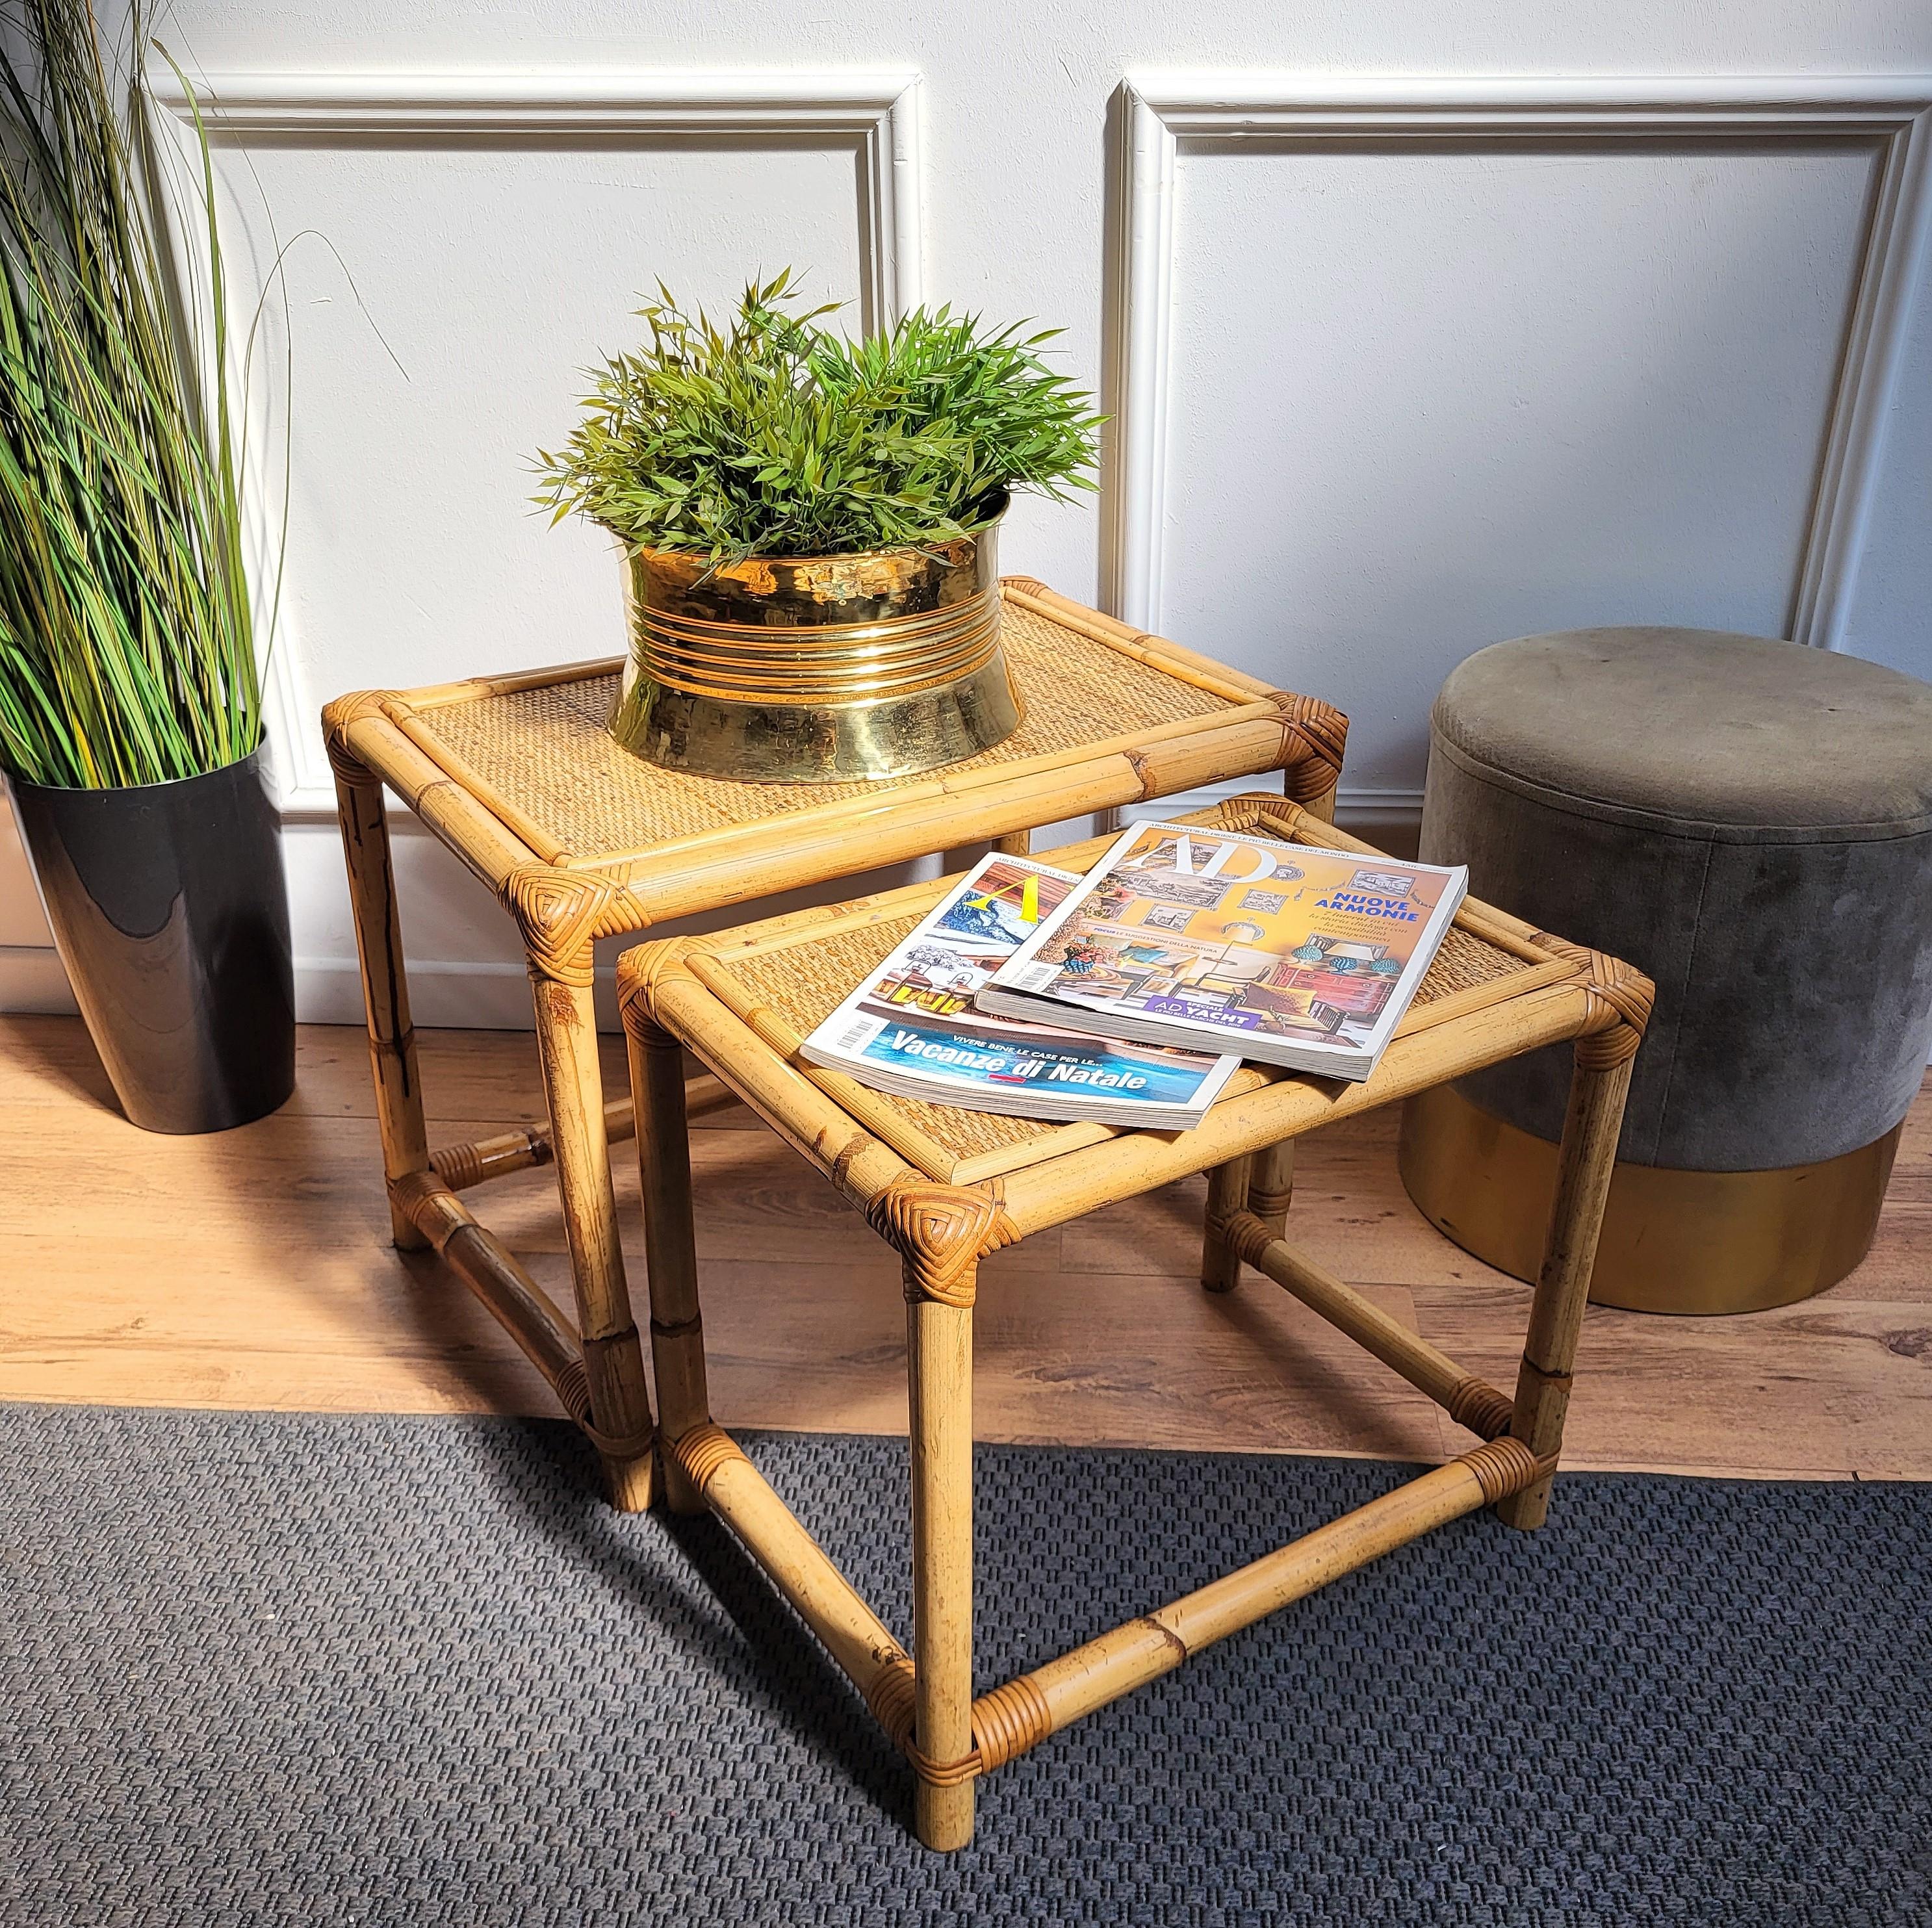 Beautiful 1960s Italian Mid-Century Modern nesting side tables or coffee tables, perfect in any entry hallway as well as next to a sofa or in any bathroom. This charming piece is in the typical style of Audoux and Minet where the organic beauty of